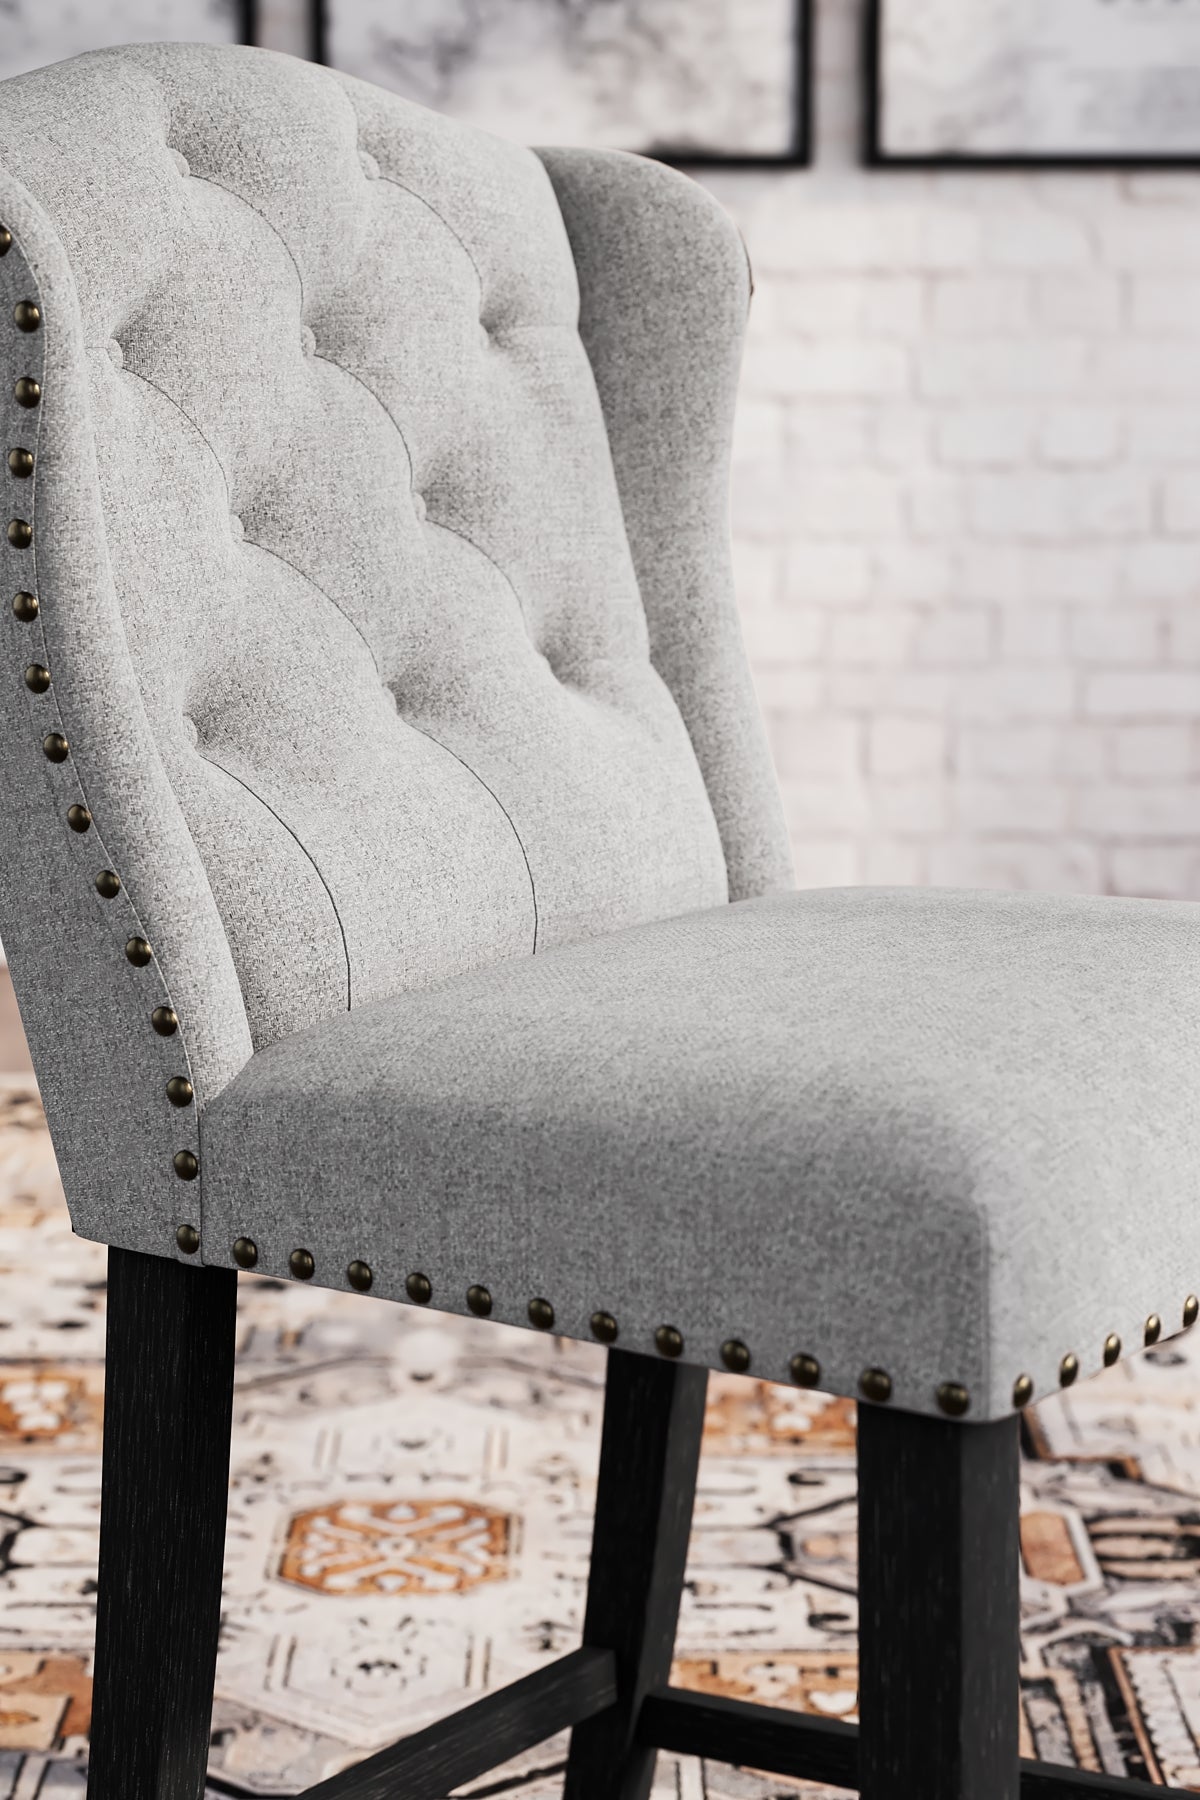 Ashley Express - Jeanette Upholstered Barstool (2/CN) at Towne & Country Furniture (AL) furniture, home furniture, home decor, sofa, bedding